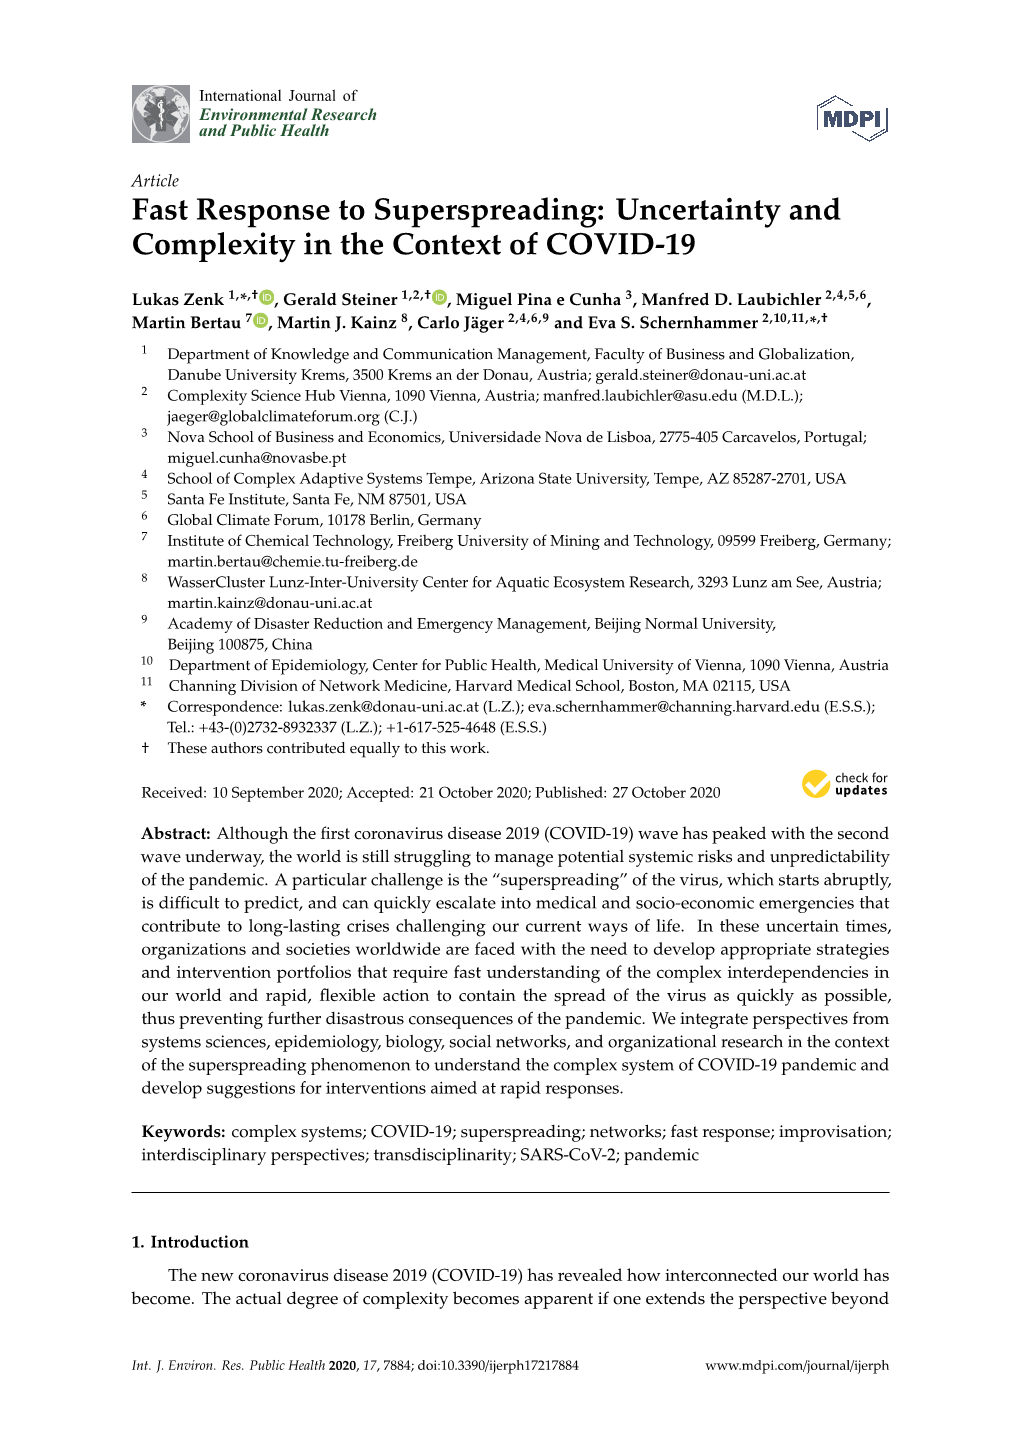 Fast Response to Superspreading: Uncertainty and Complexity in the Context of COVID-19